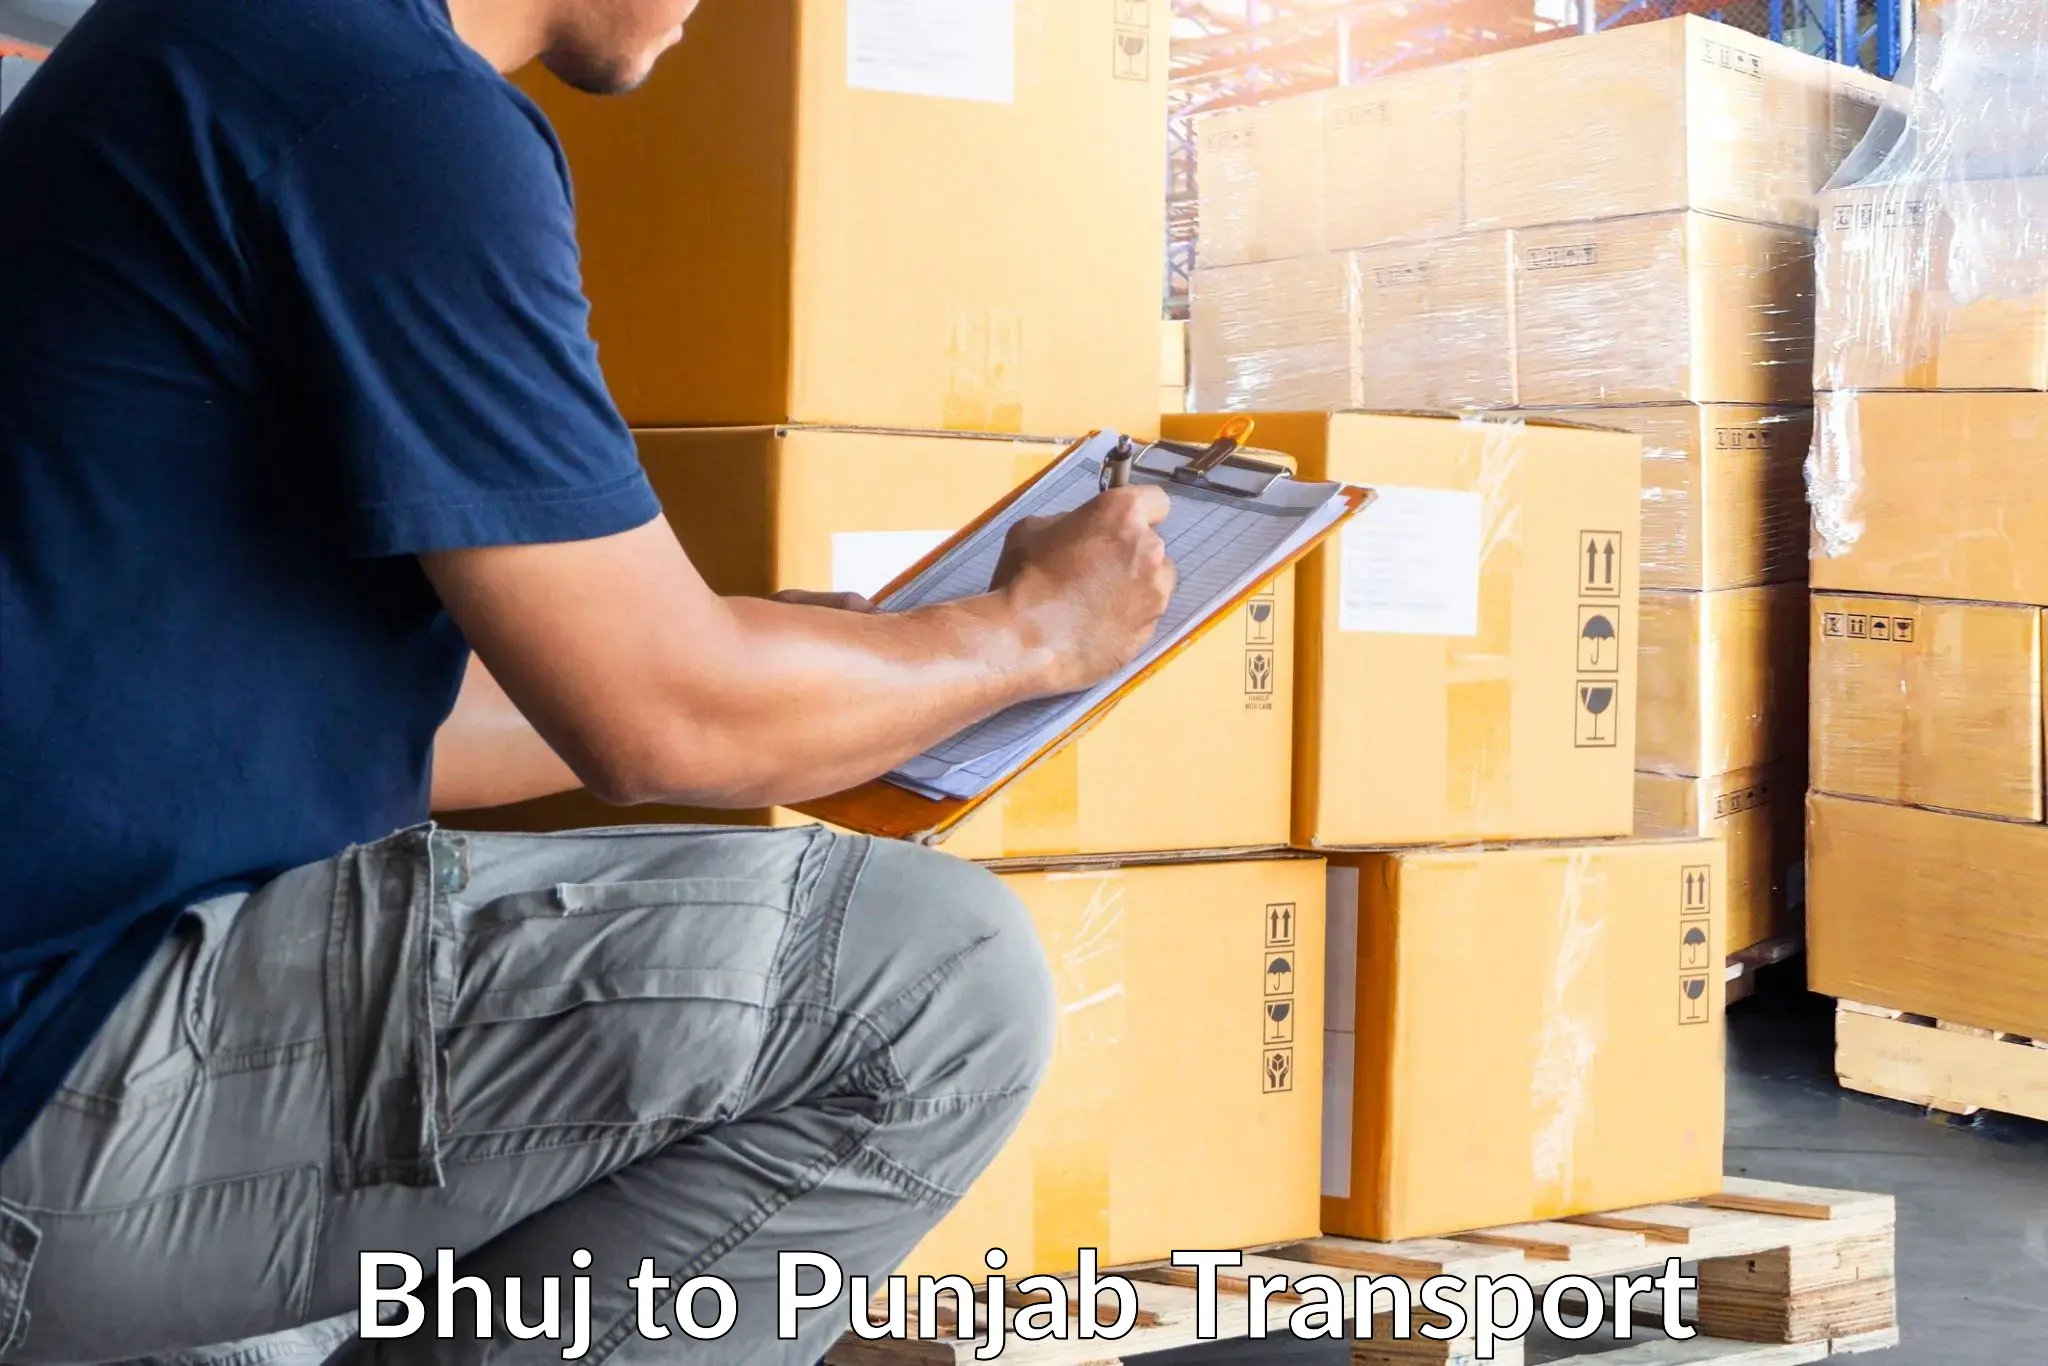 Daily parcel service transport Bhuj to Patiala